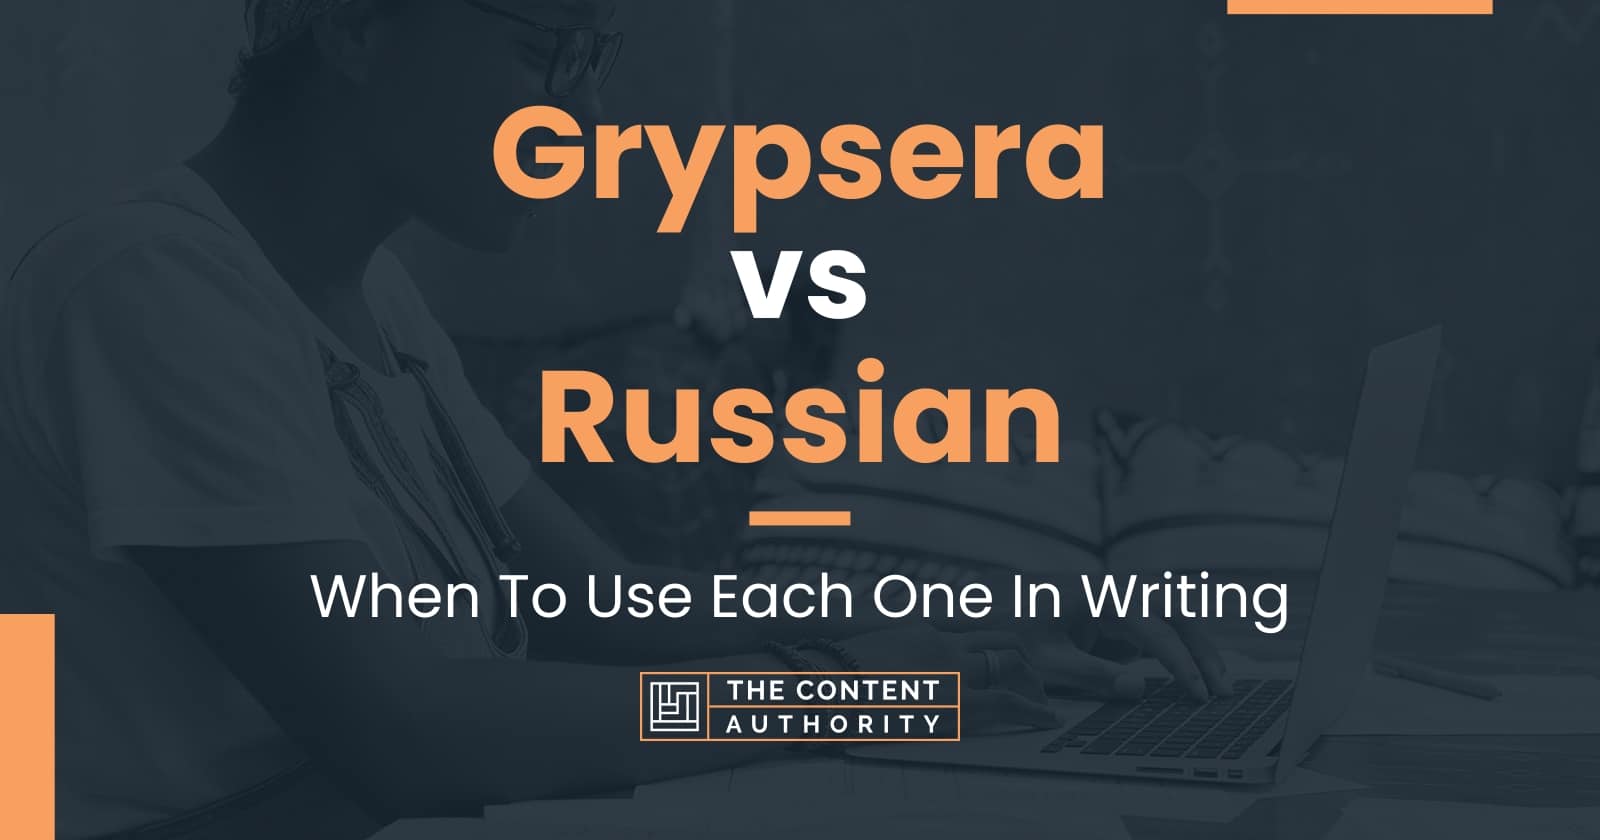 grypsera-vs-russian-when-to-use-each-one-in-writing